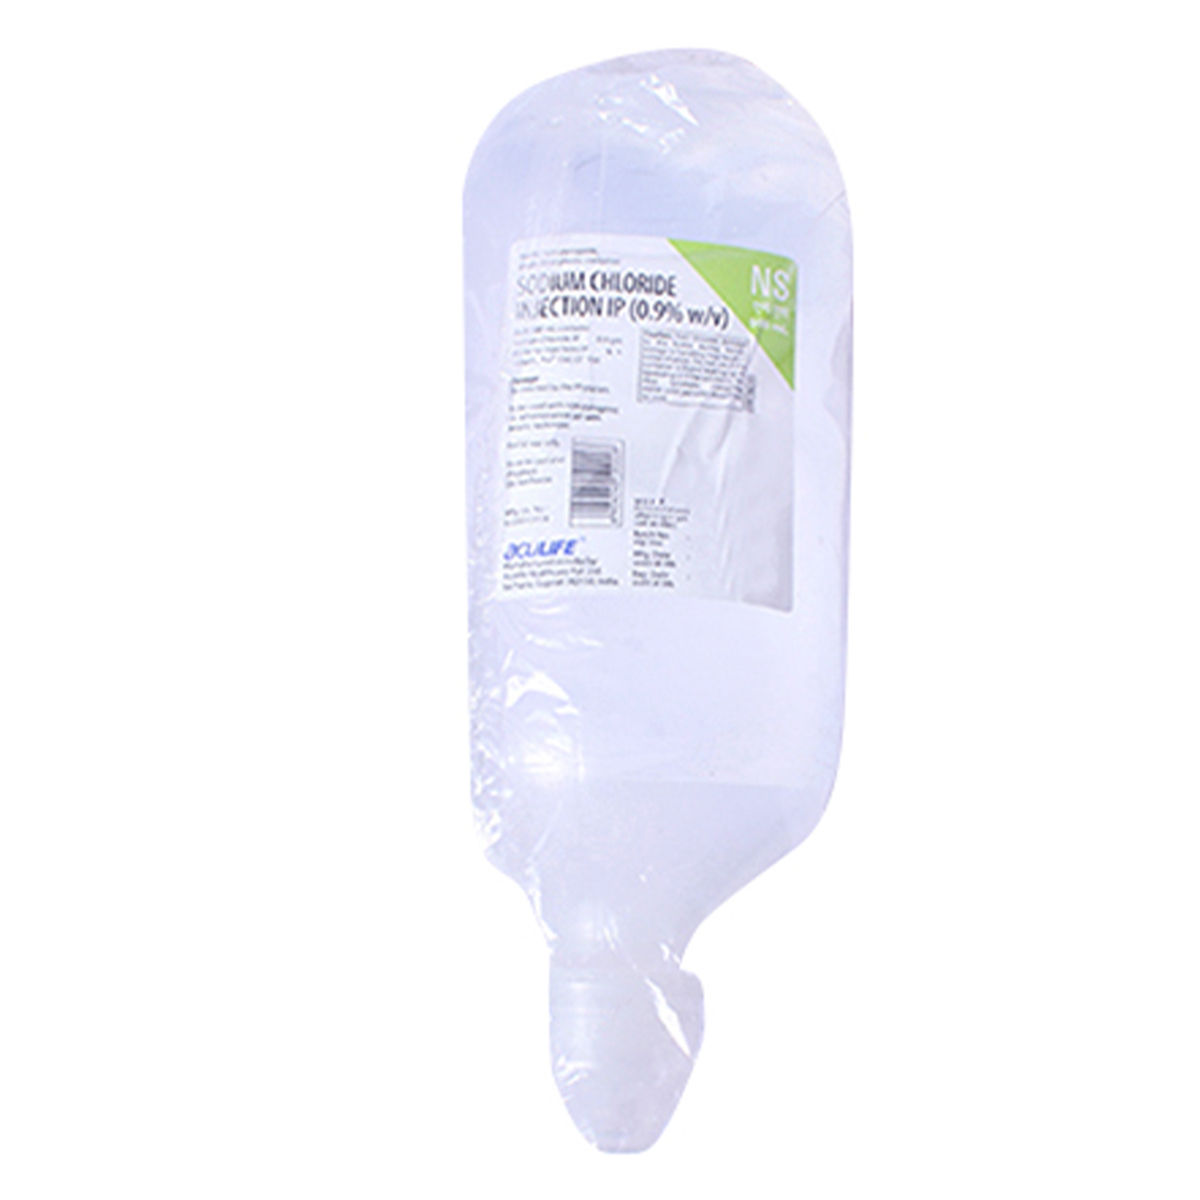 Buy Aculife Sodium Chloride 0.9% Infusion 500 ml Online